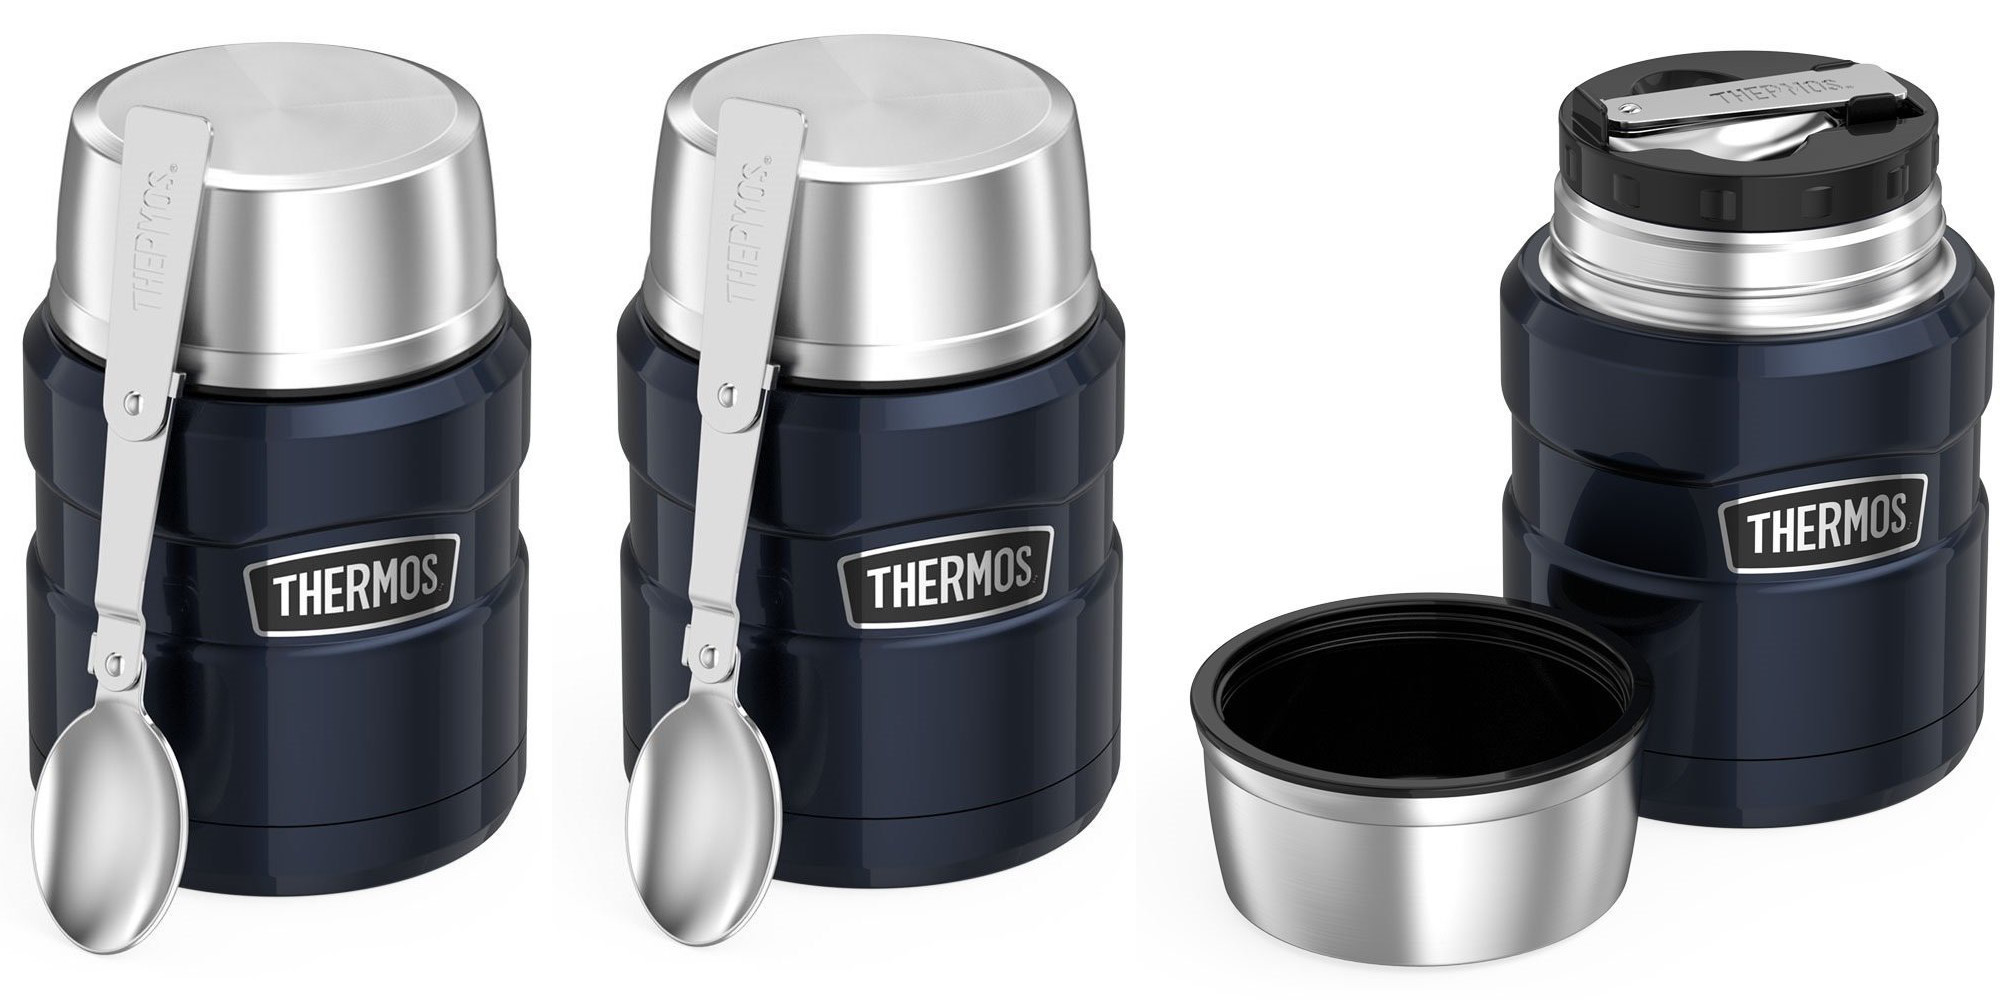 https://9to5toys.com/wp-content/uploads/sites/5/2017/09/thermos-stainless-king-16-ounce-food-jar-with-folding-spoon.jpg